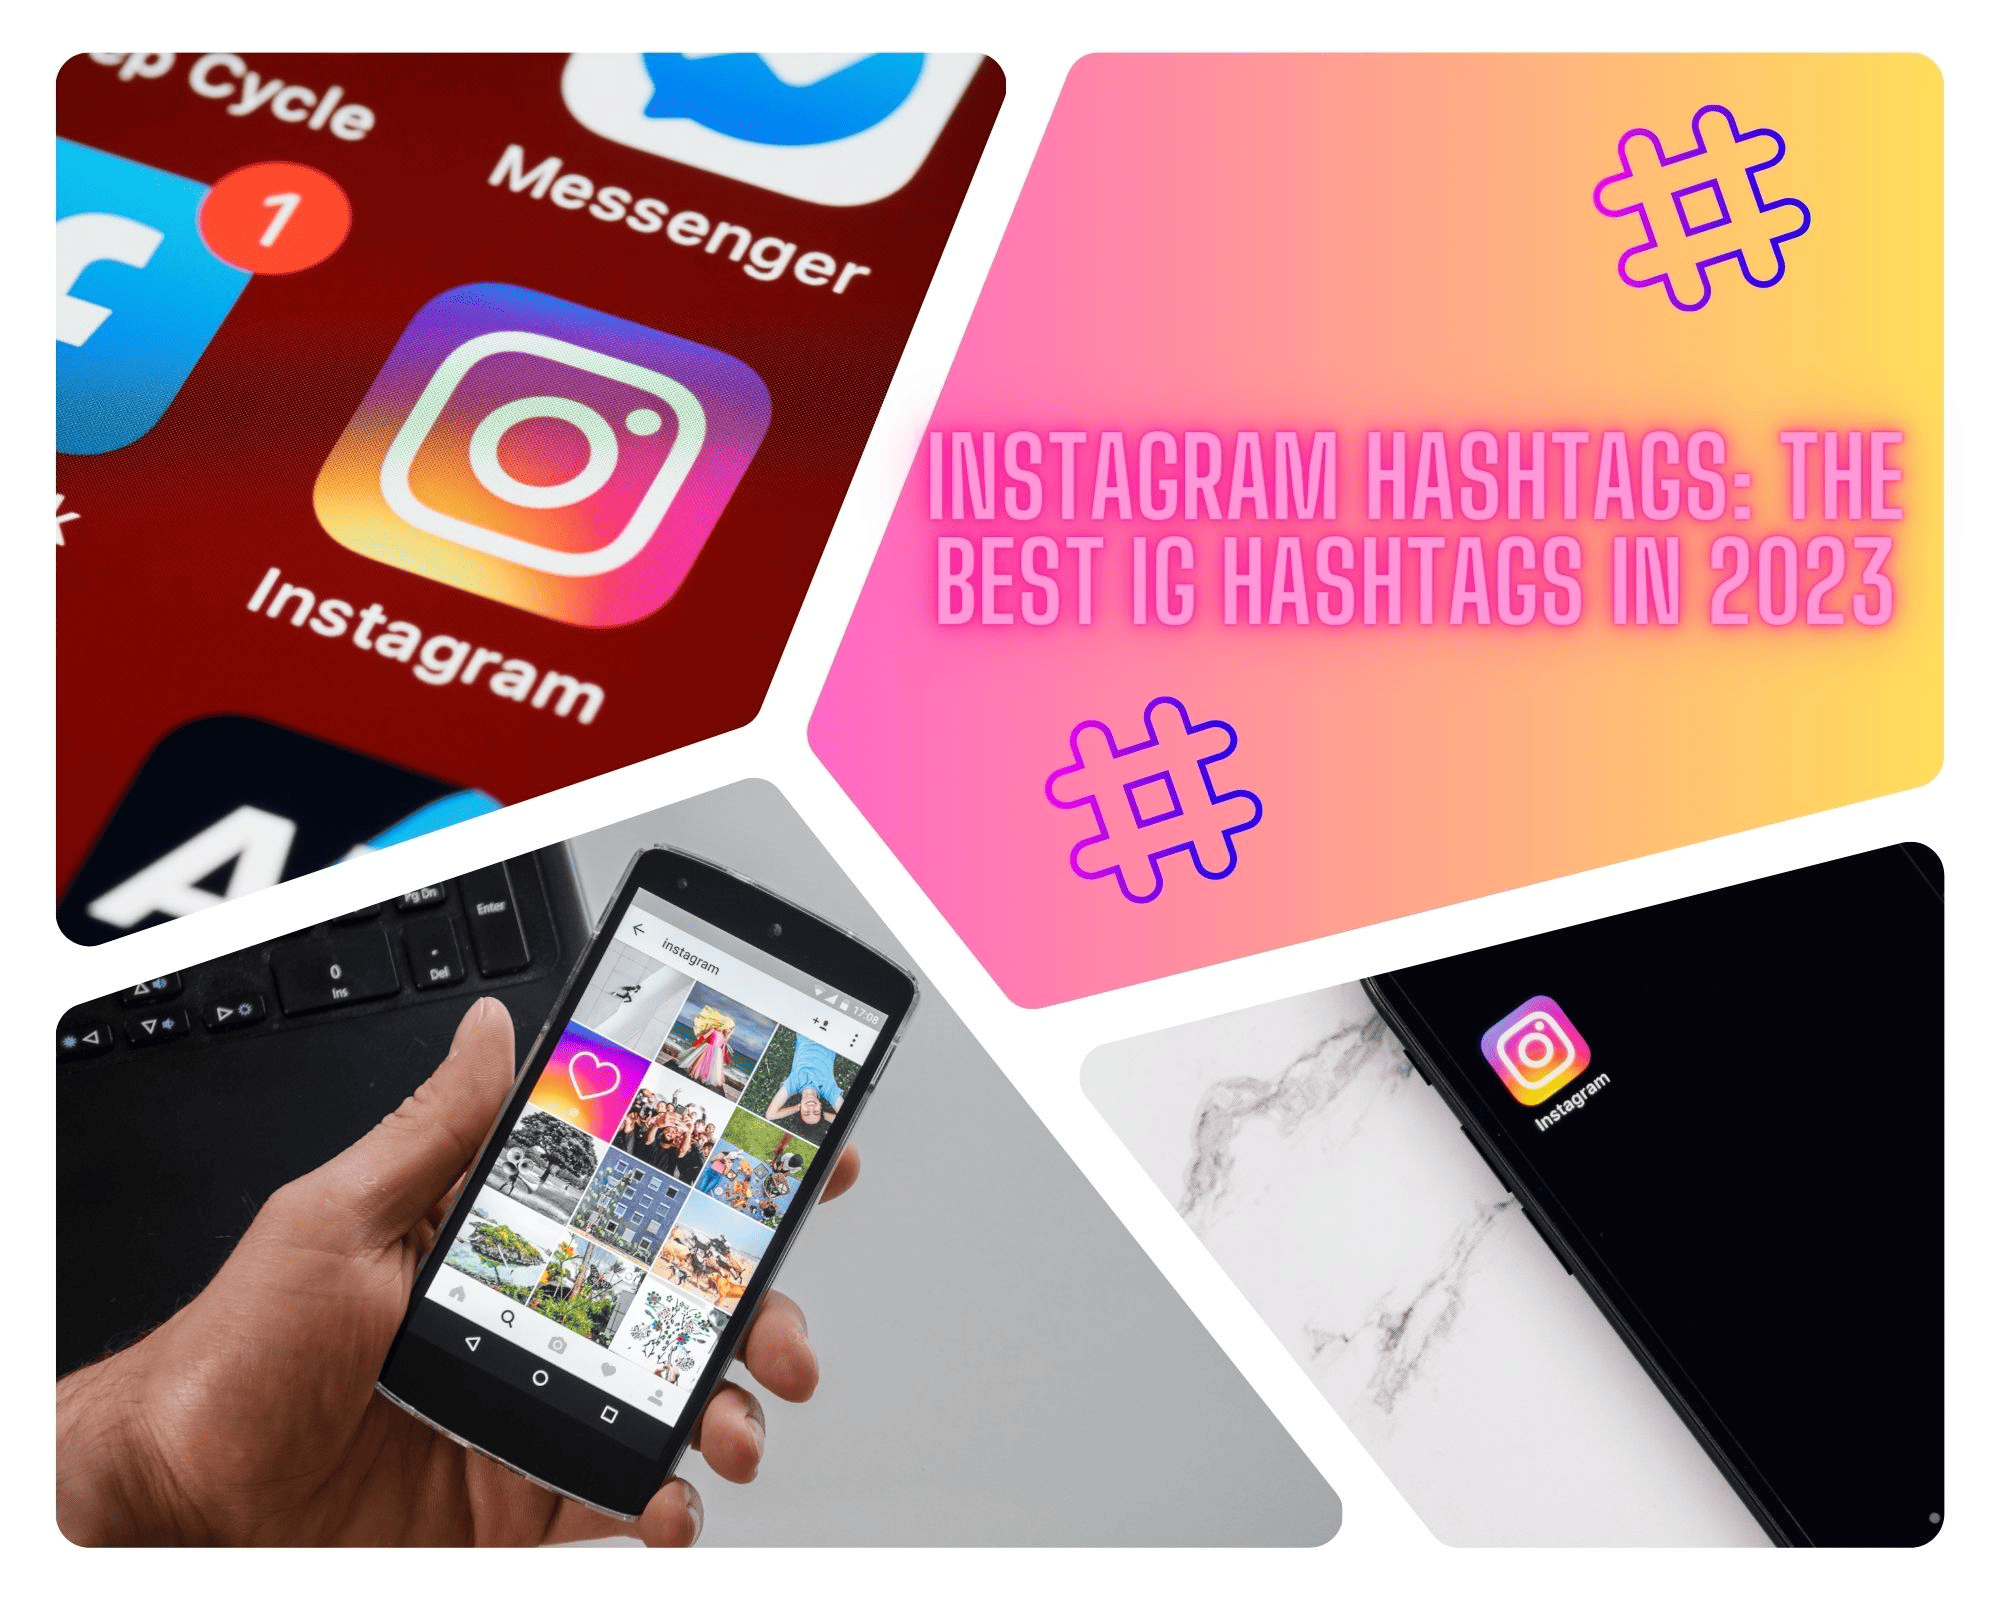 Instagram Hashtags: The Best IG Hashtags in 2023-2024